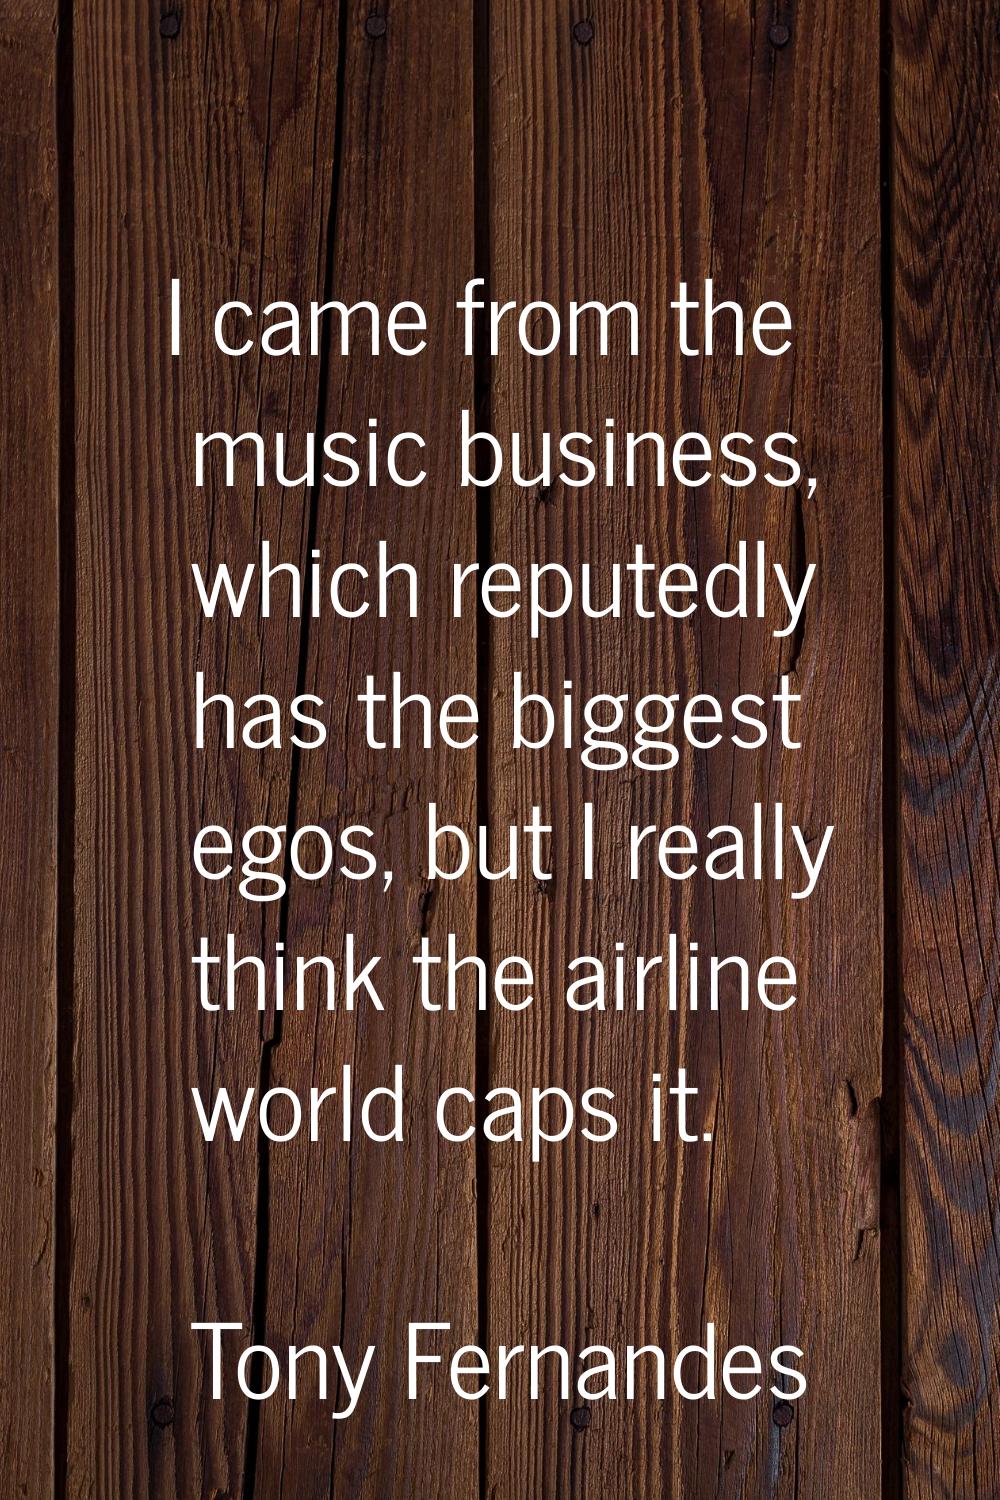 I came from the music business, which reputedly has the biggest egos, but I really think the airlin